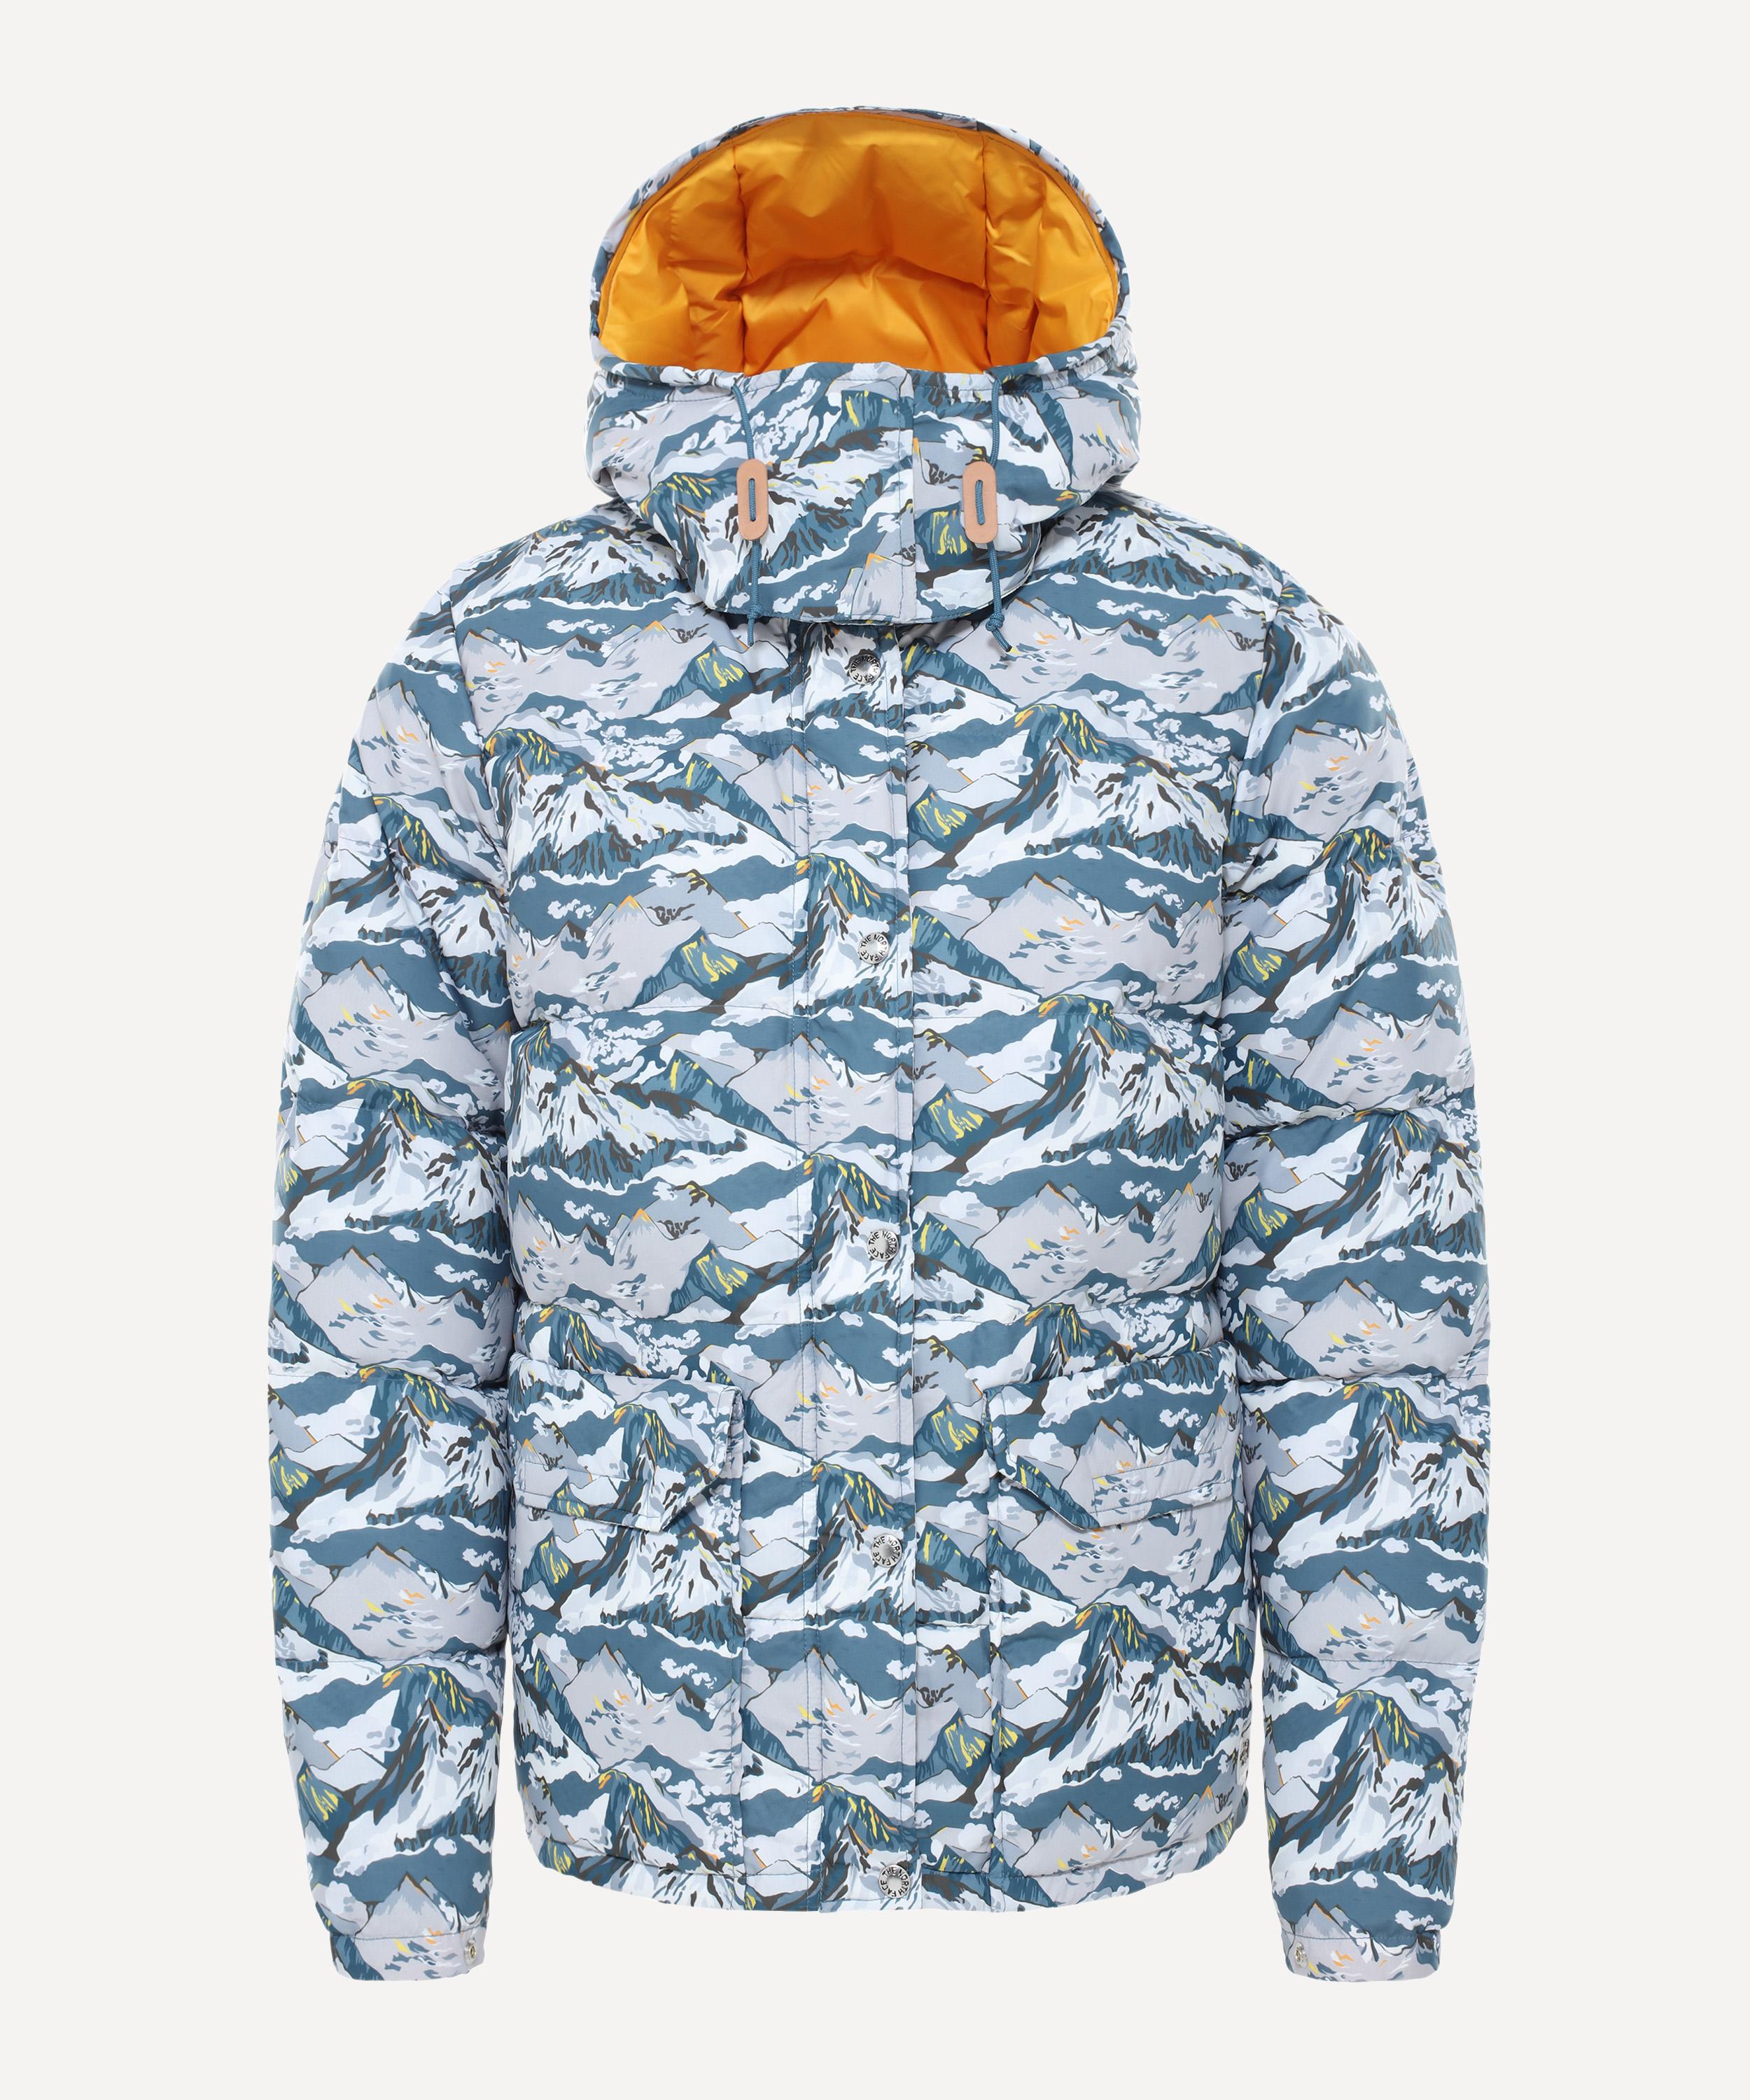 north face mountain print jacket